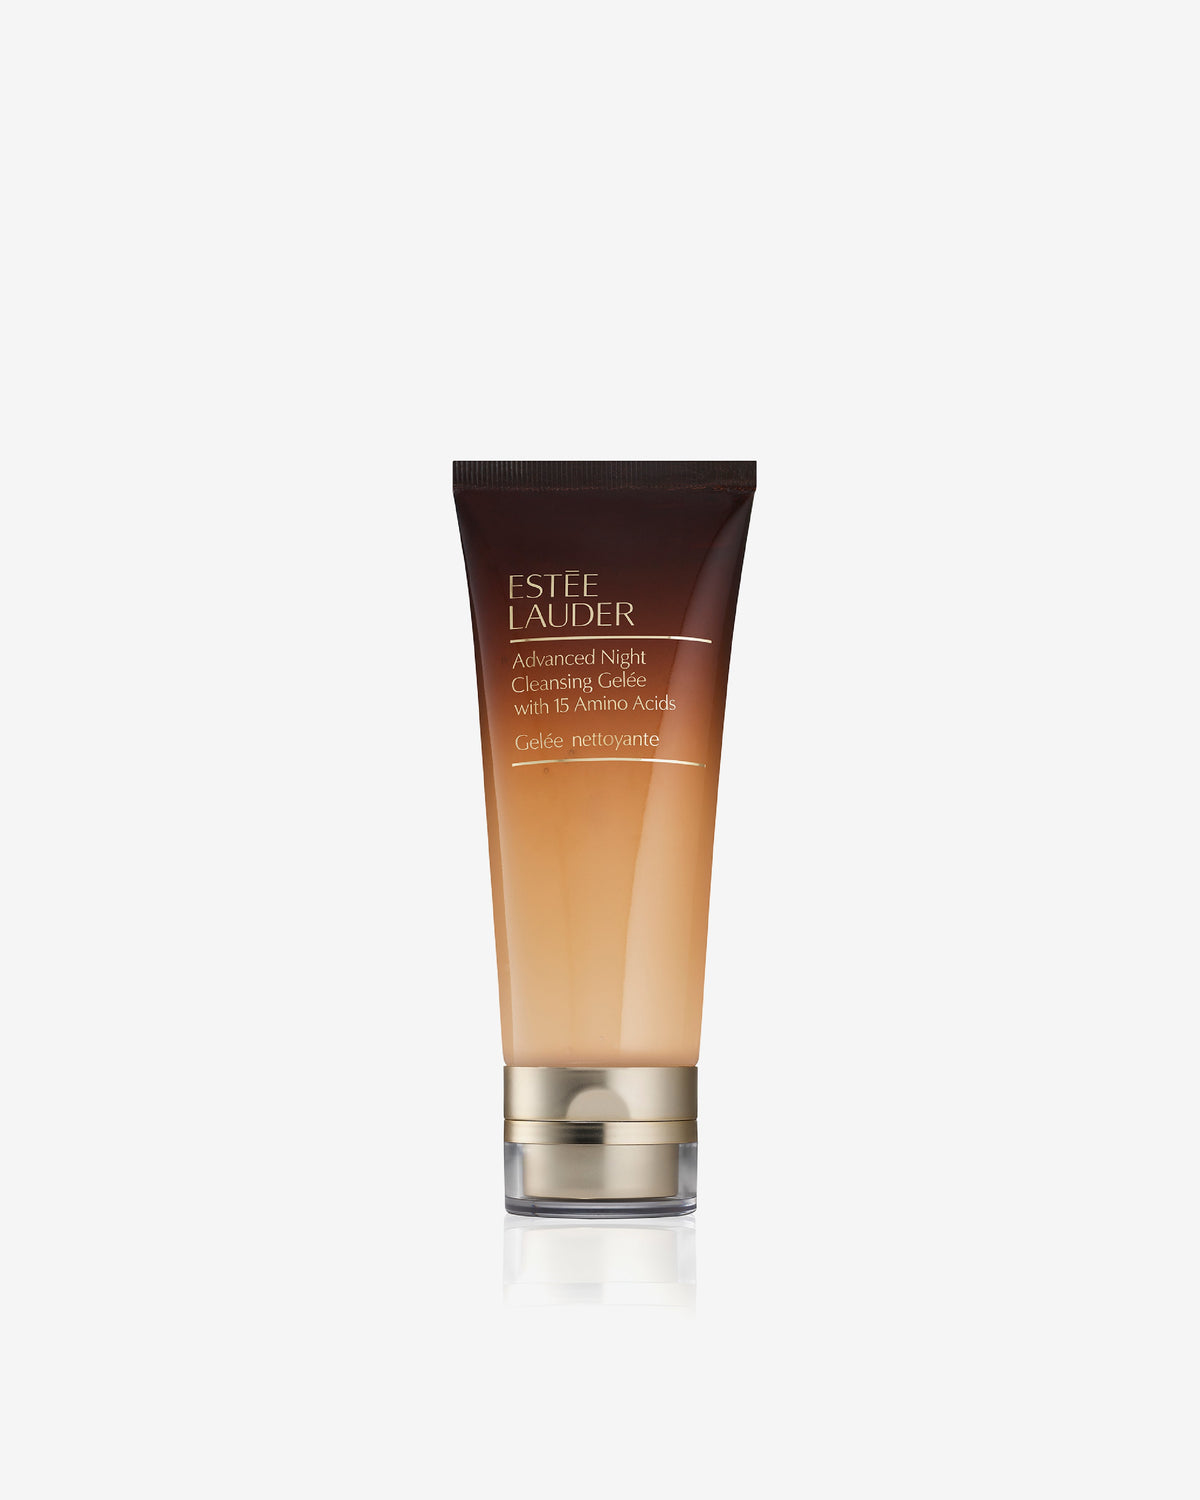 Advanced Night Cleansing Gelée Cleanser